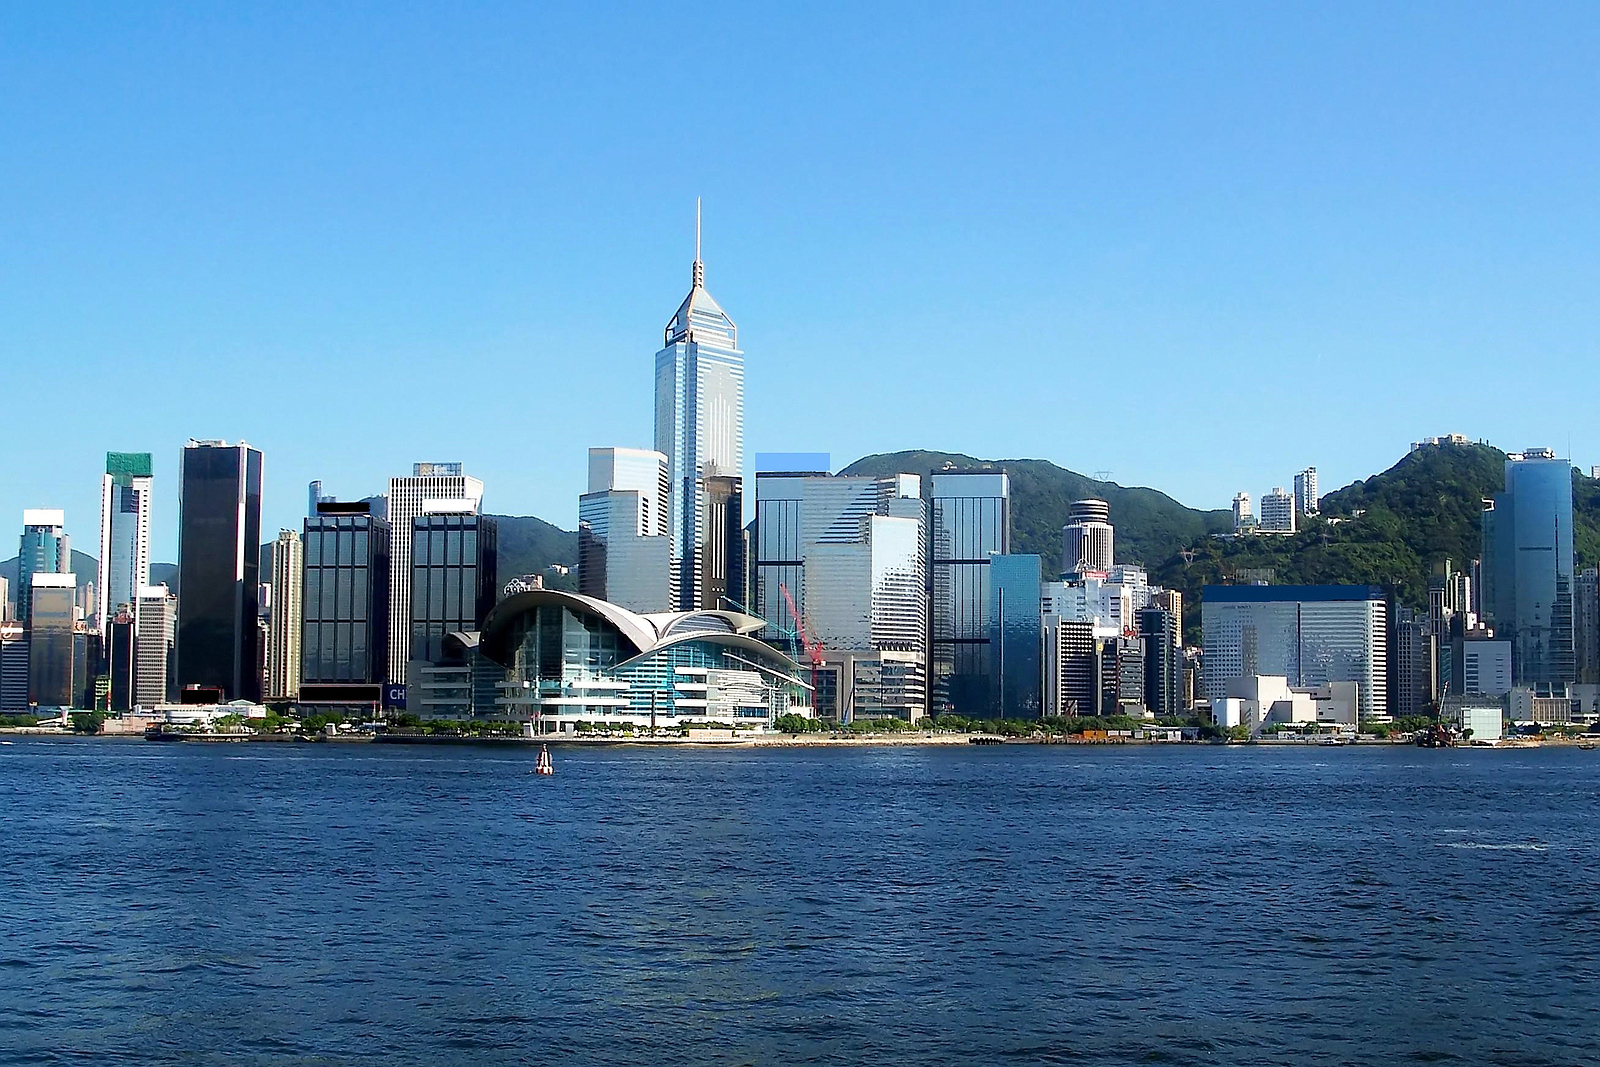 Hong kong as seen from Kowloon side on a clear sunny day.